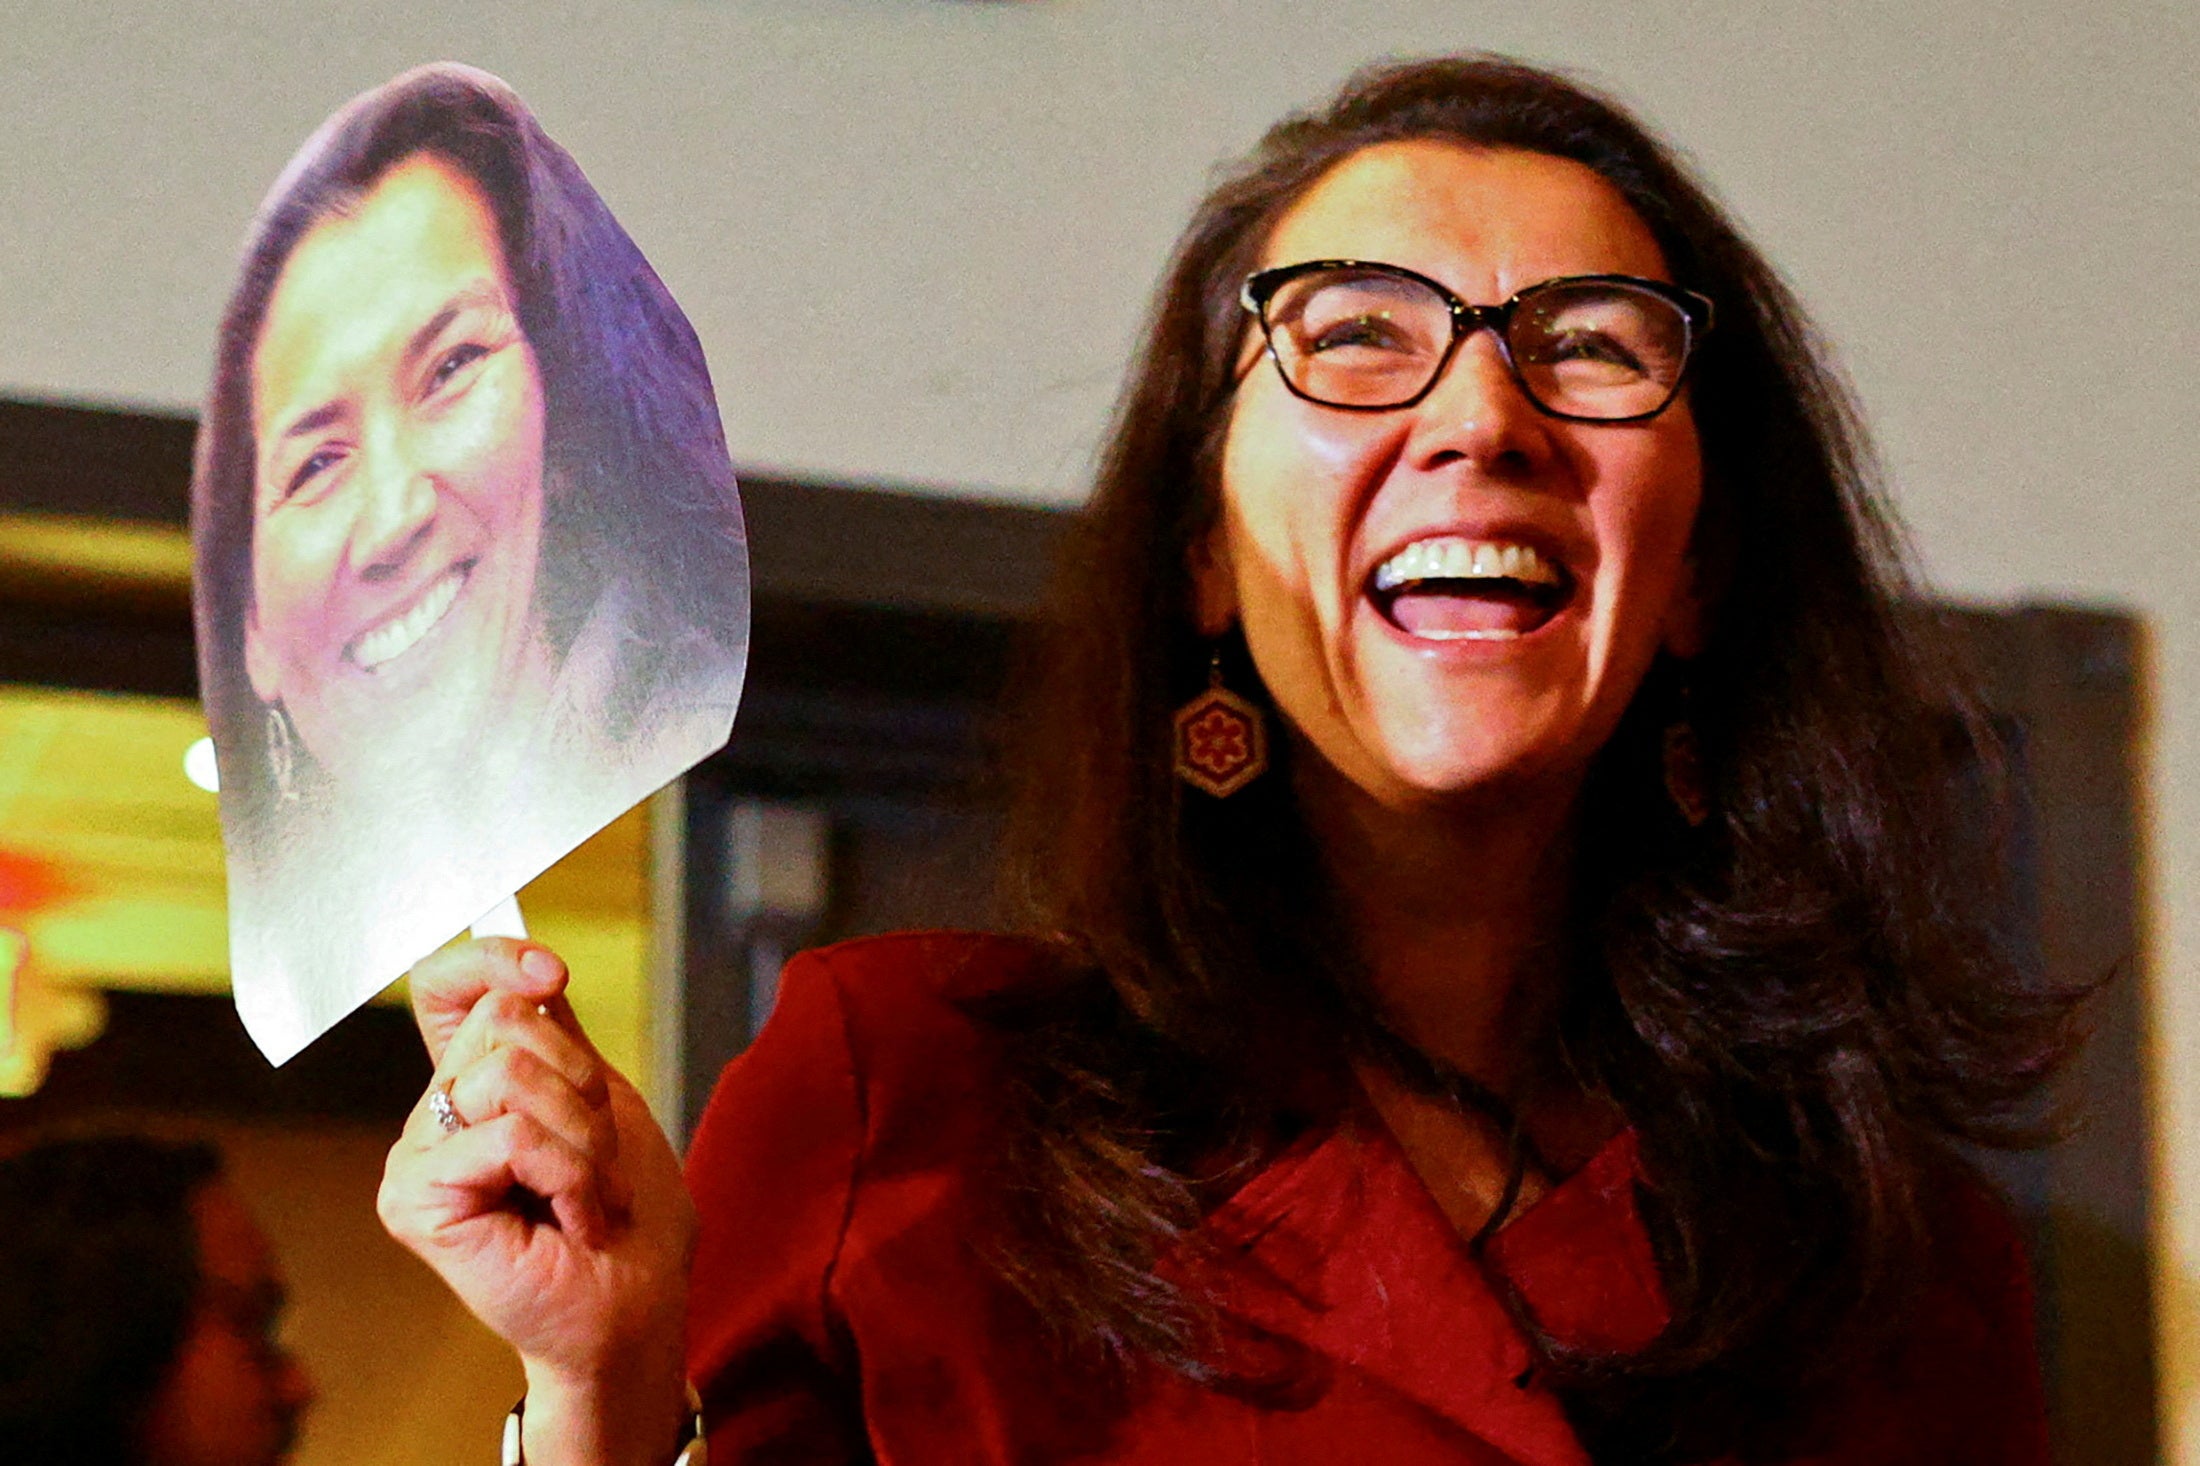 A woman smiling widely, holding a mask decorated with an image of her face.